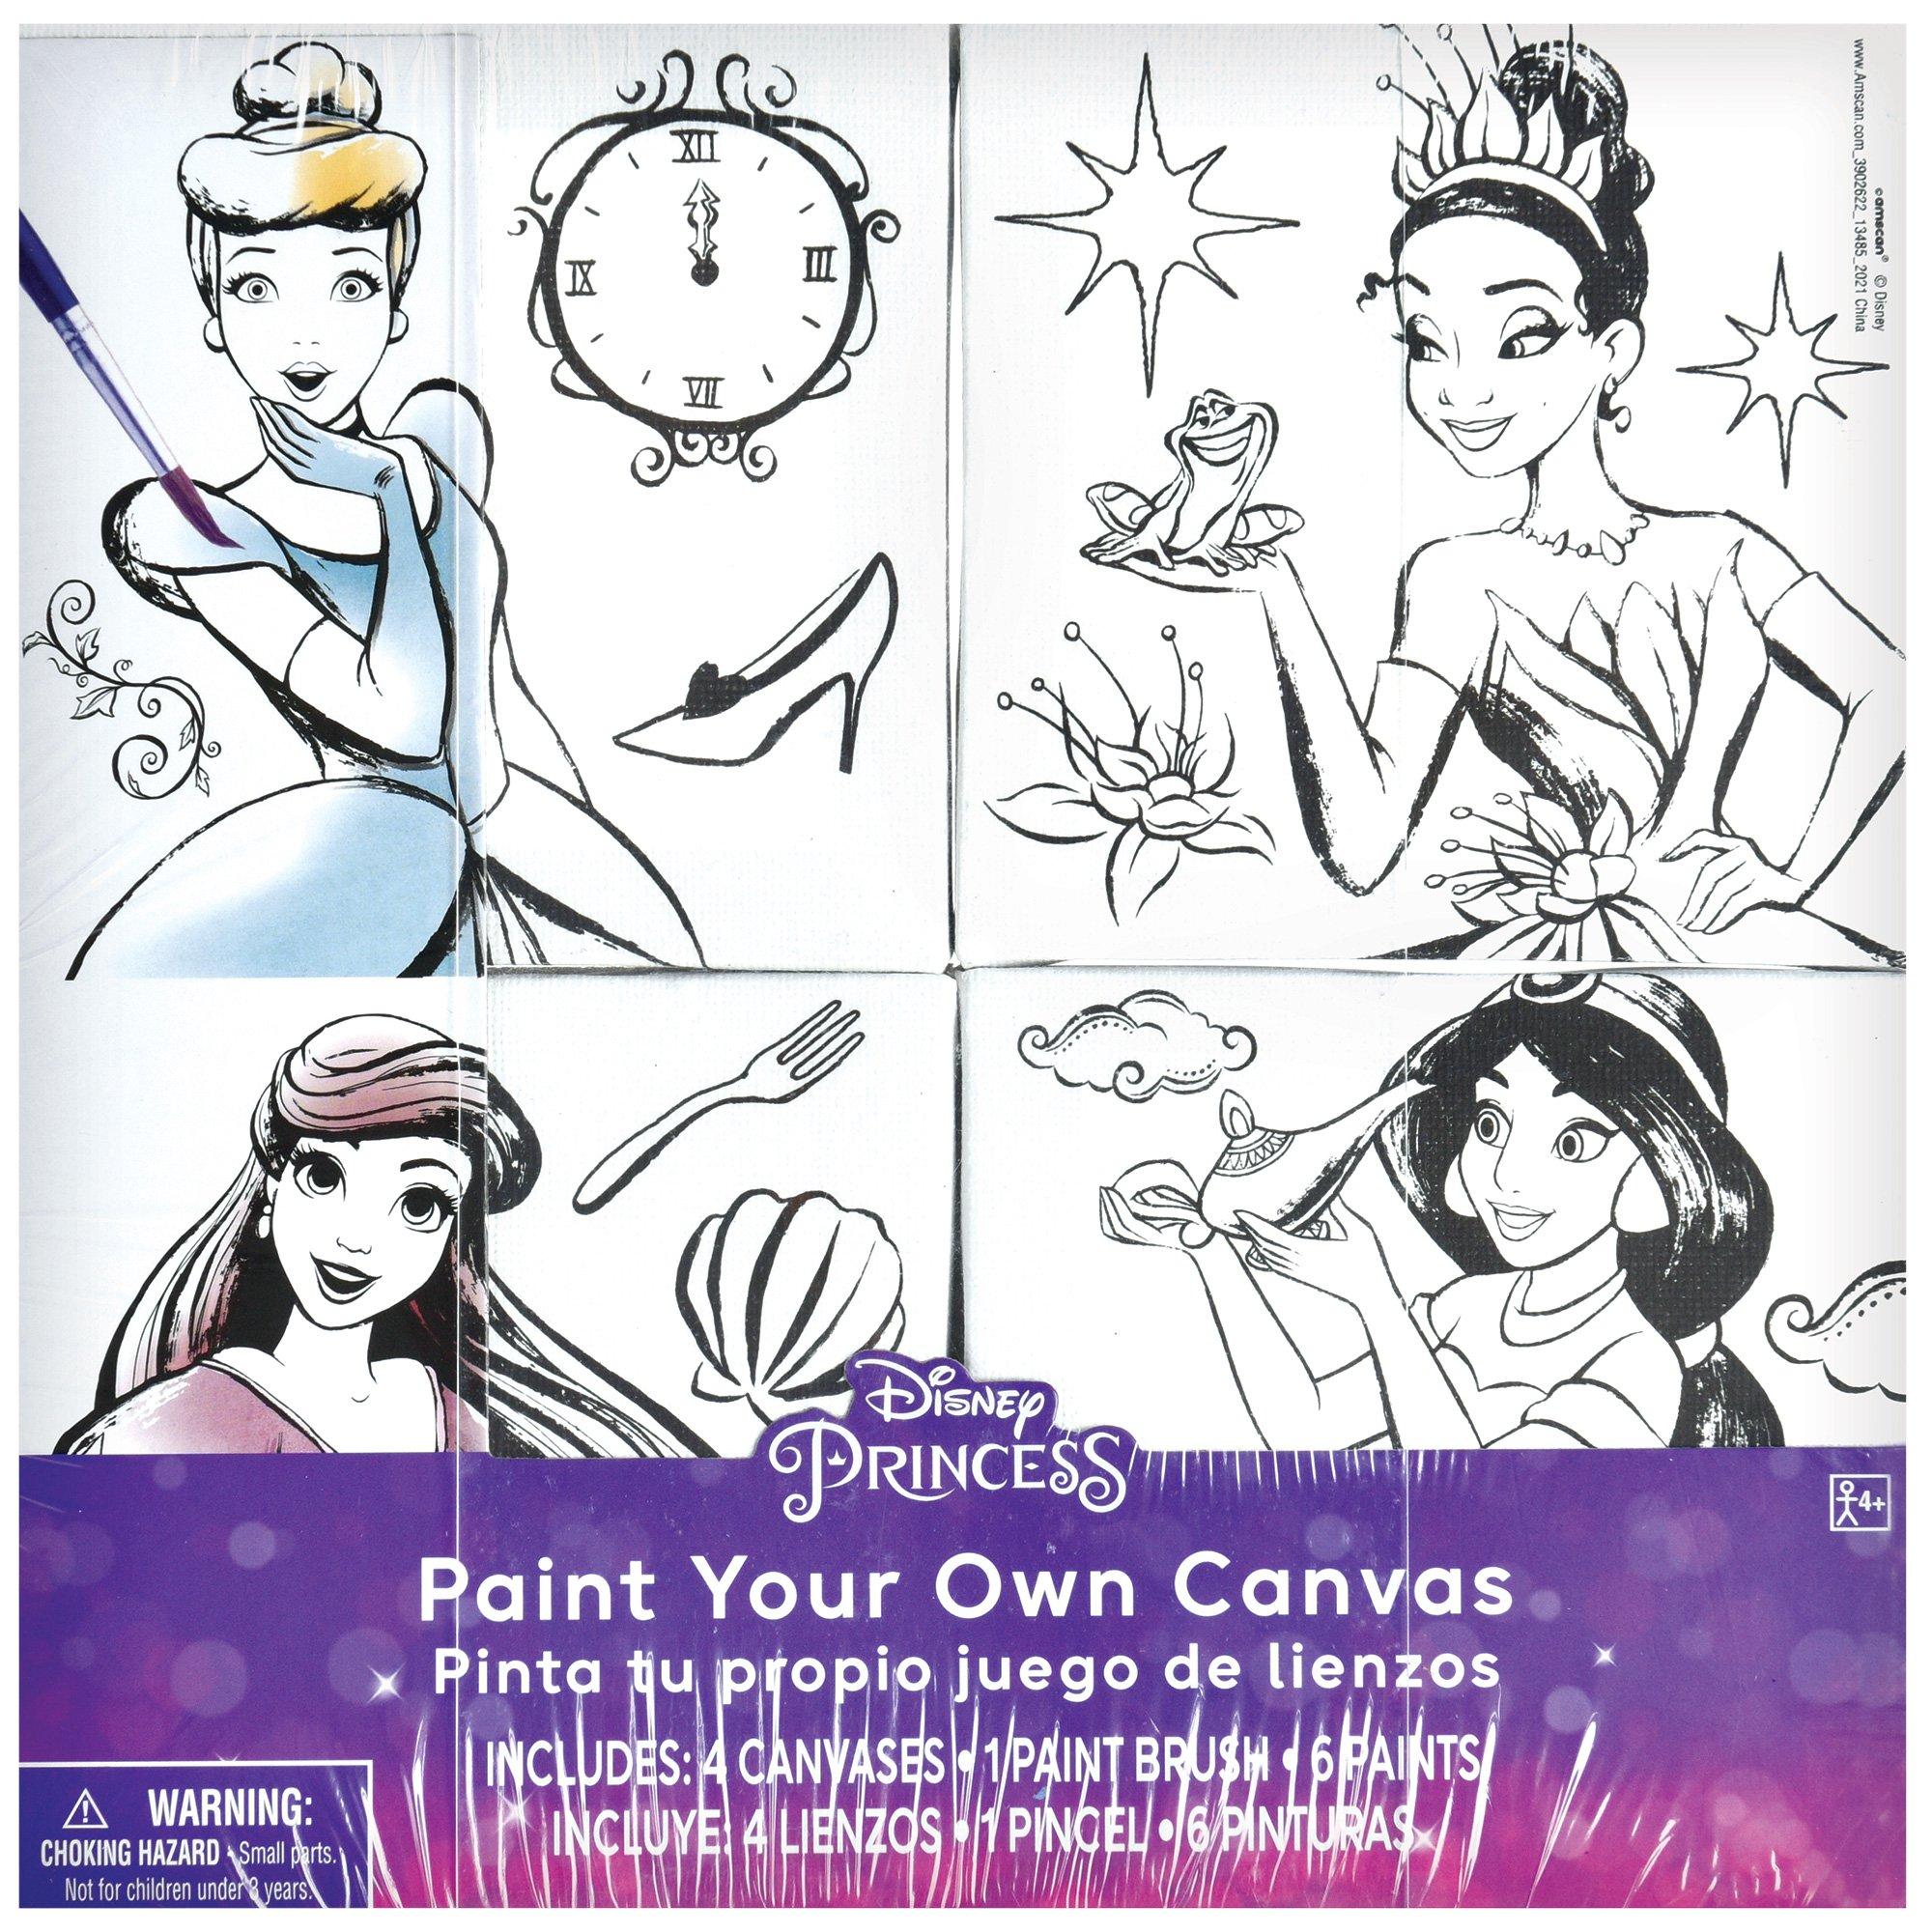 Female Disney Villains - Paint By Number - Paint by numbers for adult